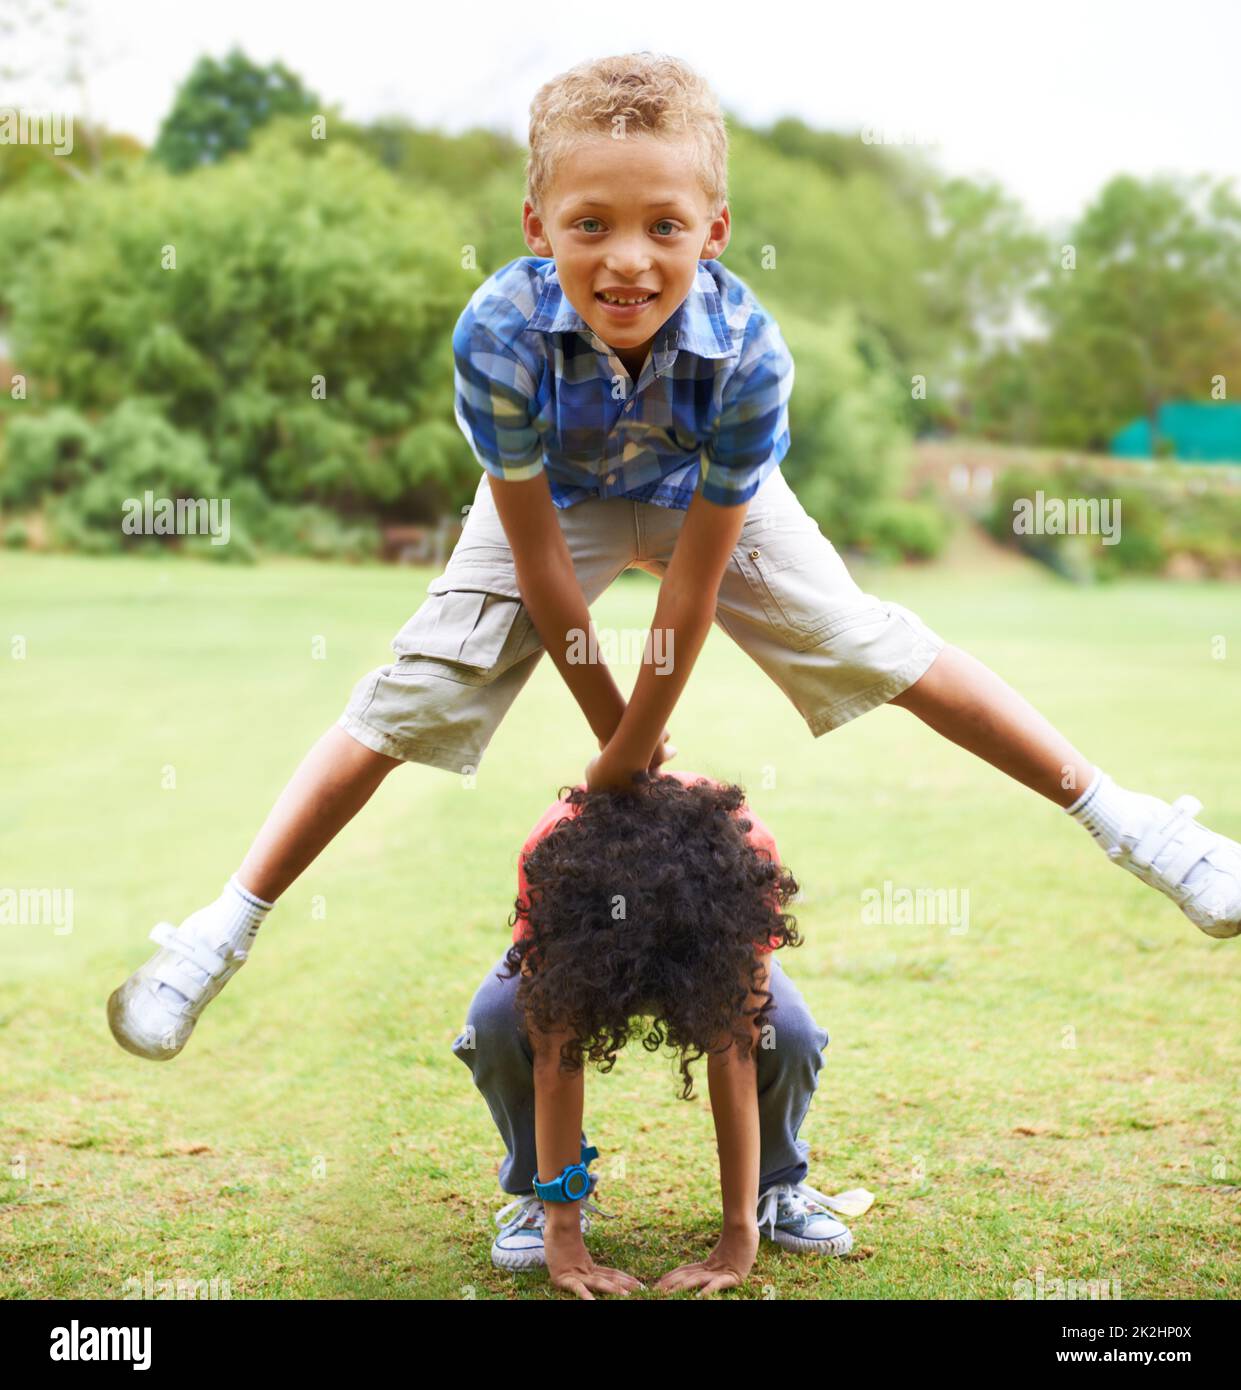 Leapfrogging. A young boy doing a leapfrog over his friend's back. Stock Photo